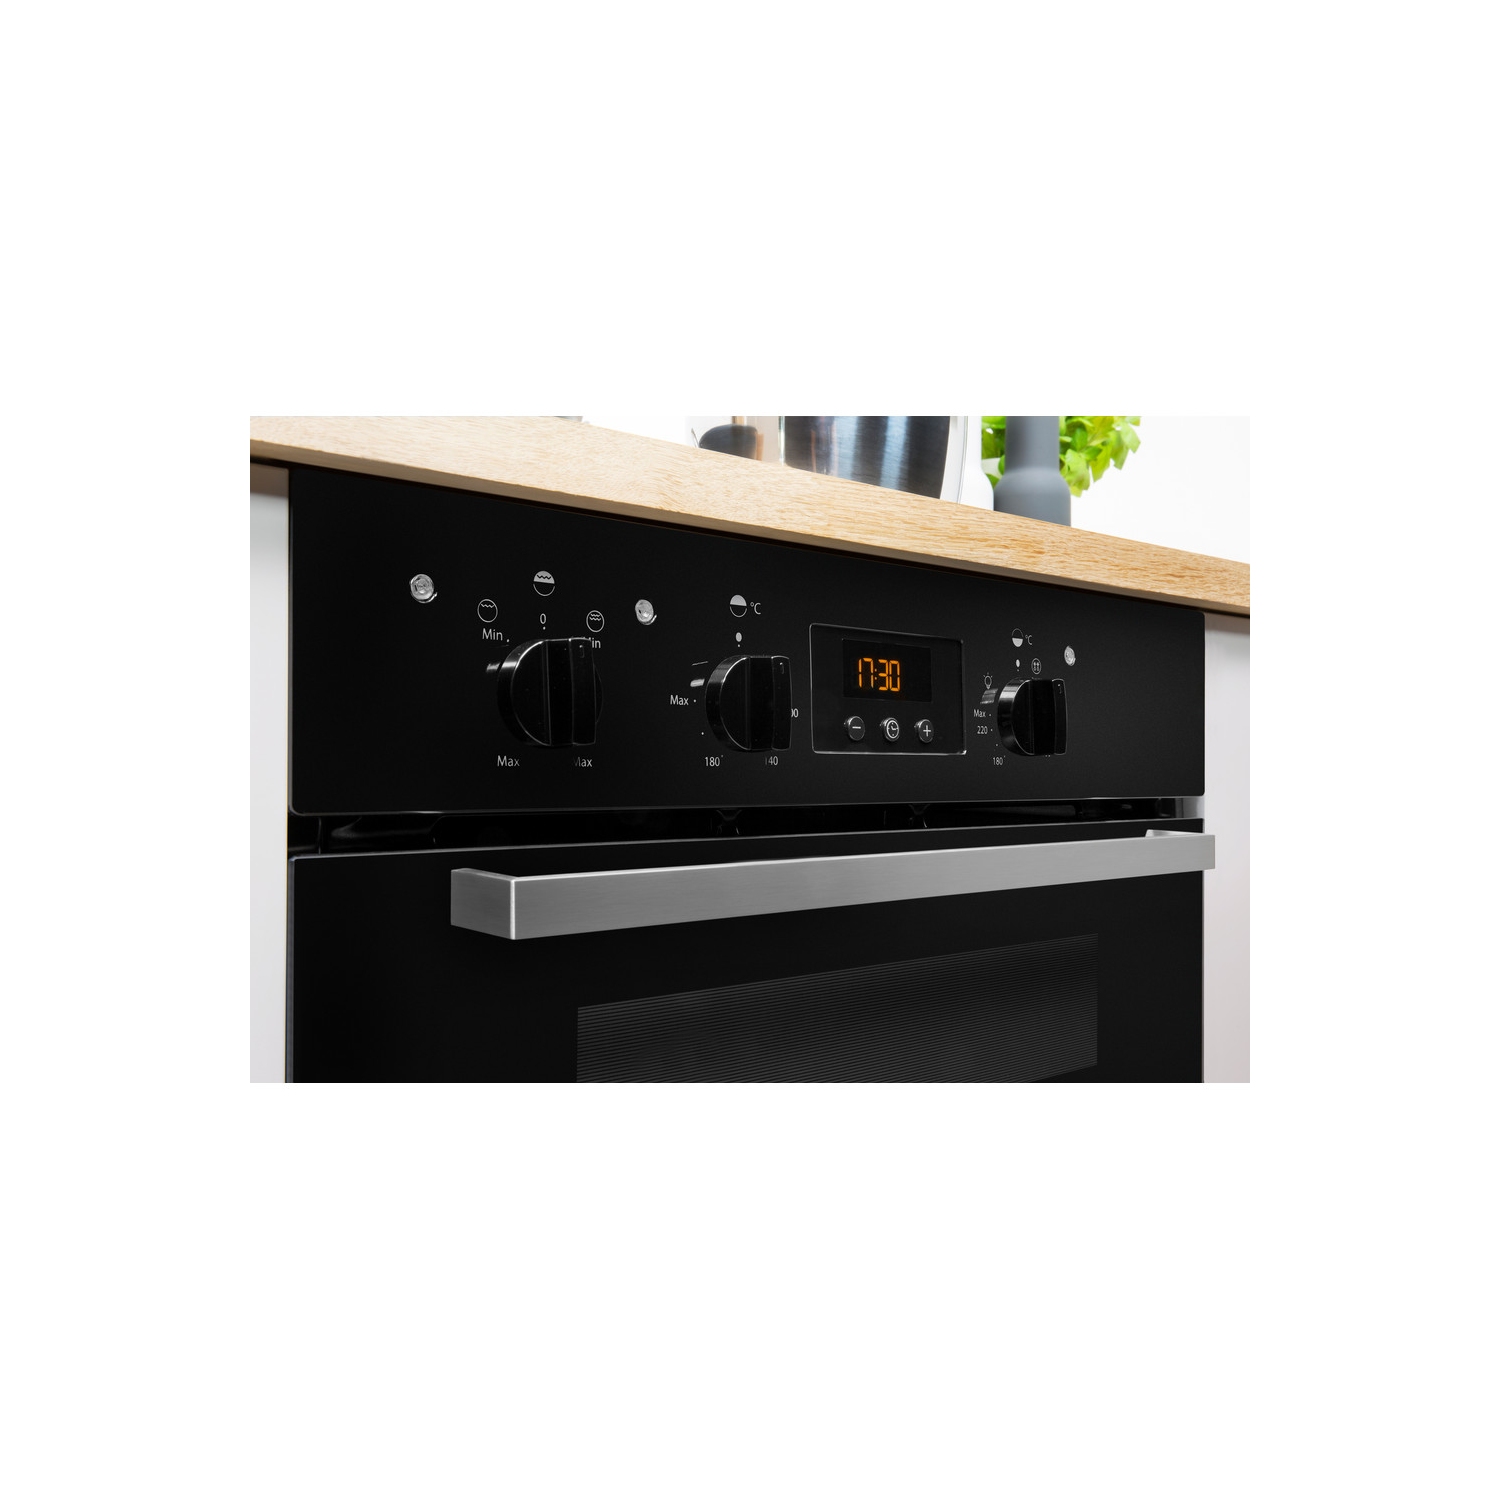 Indesit Built In Electric Double Oven - Black - B Rated - 4